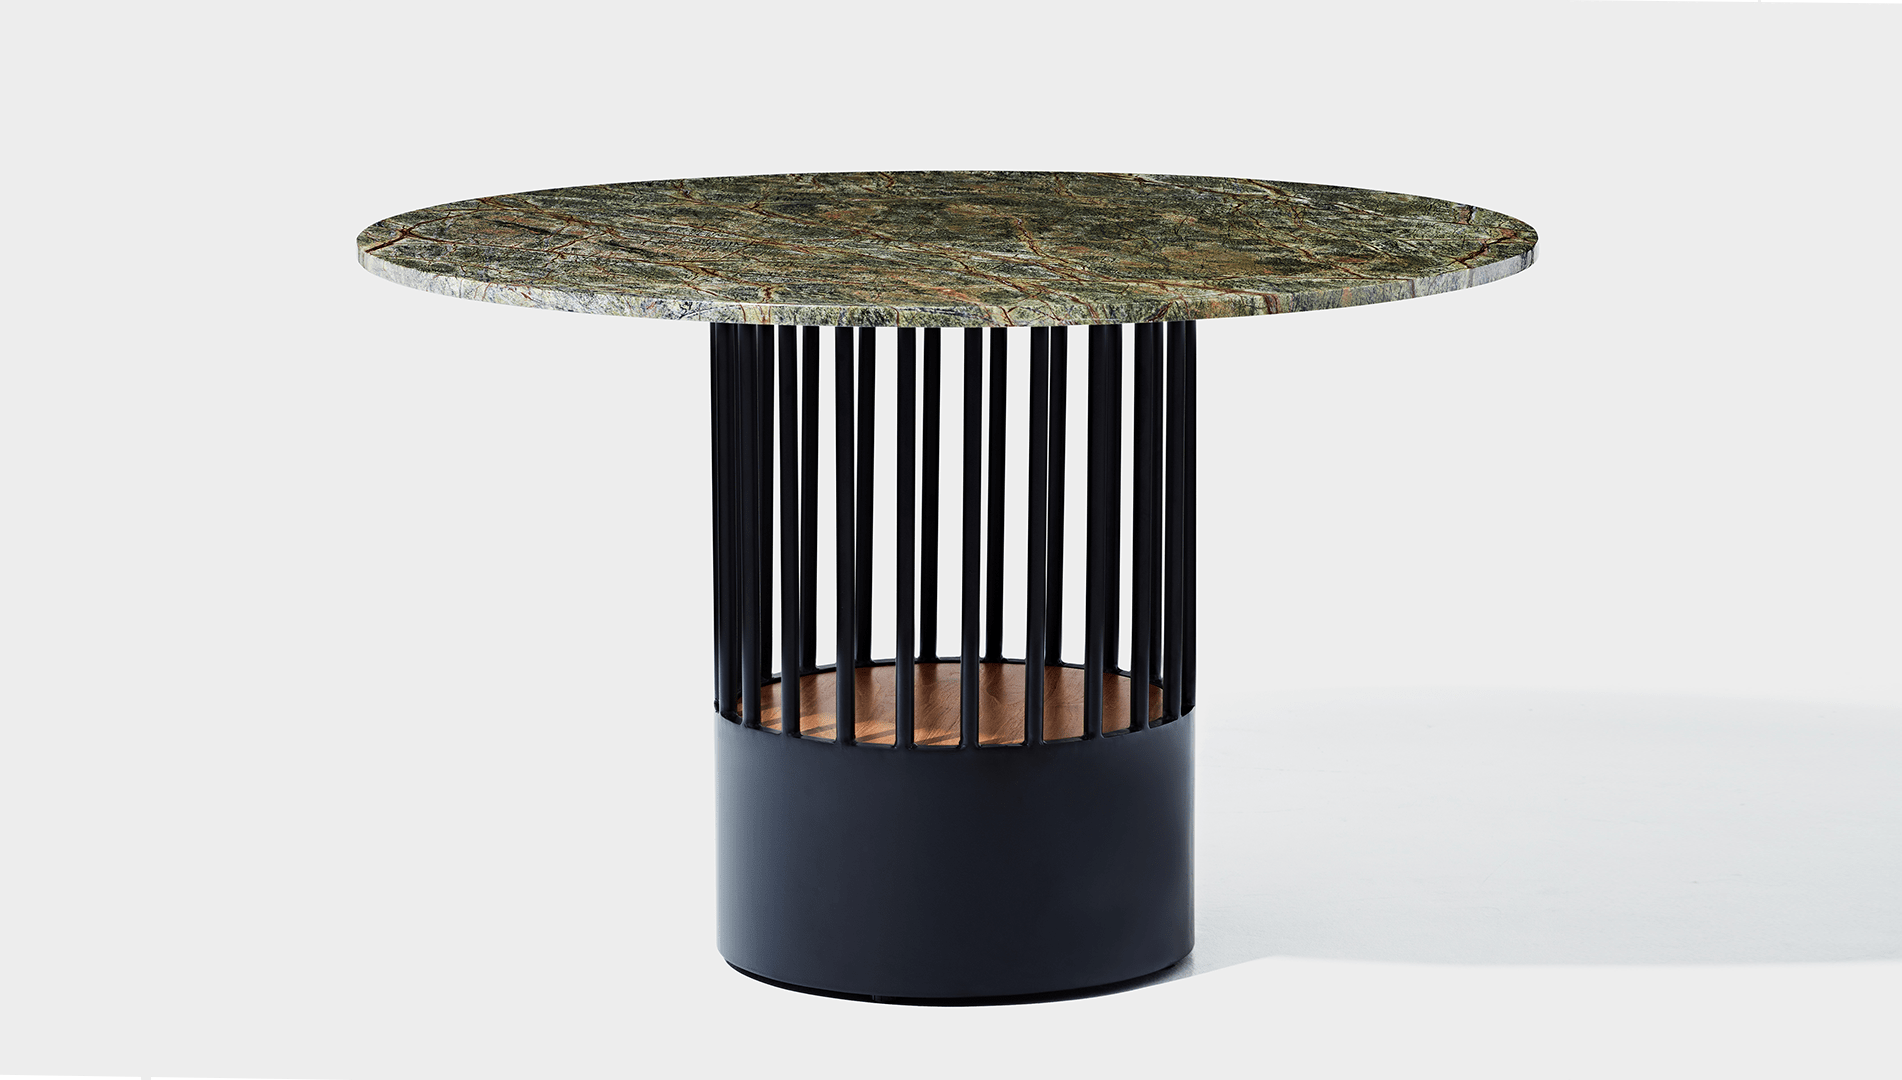 reddie-raw round 120dia x 75H *cm / Stone~Forest Green / Metal~Black Willy Cage Table - Marble